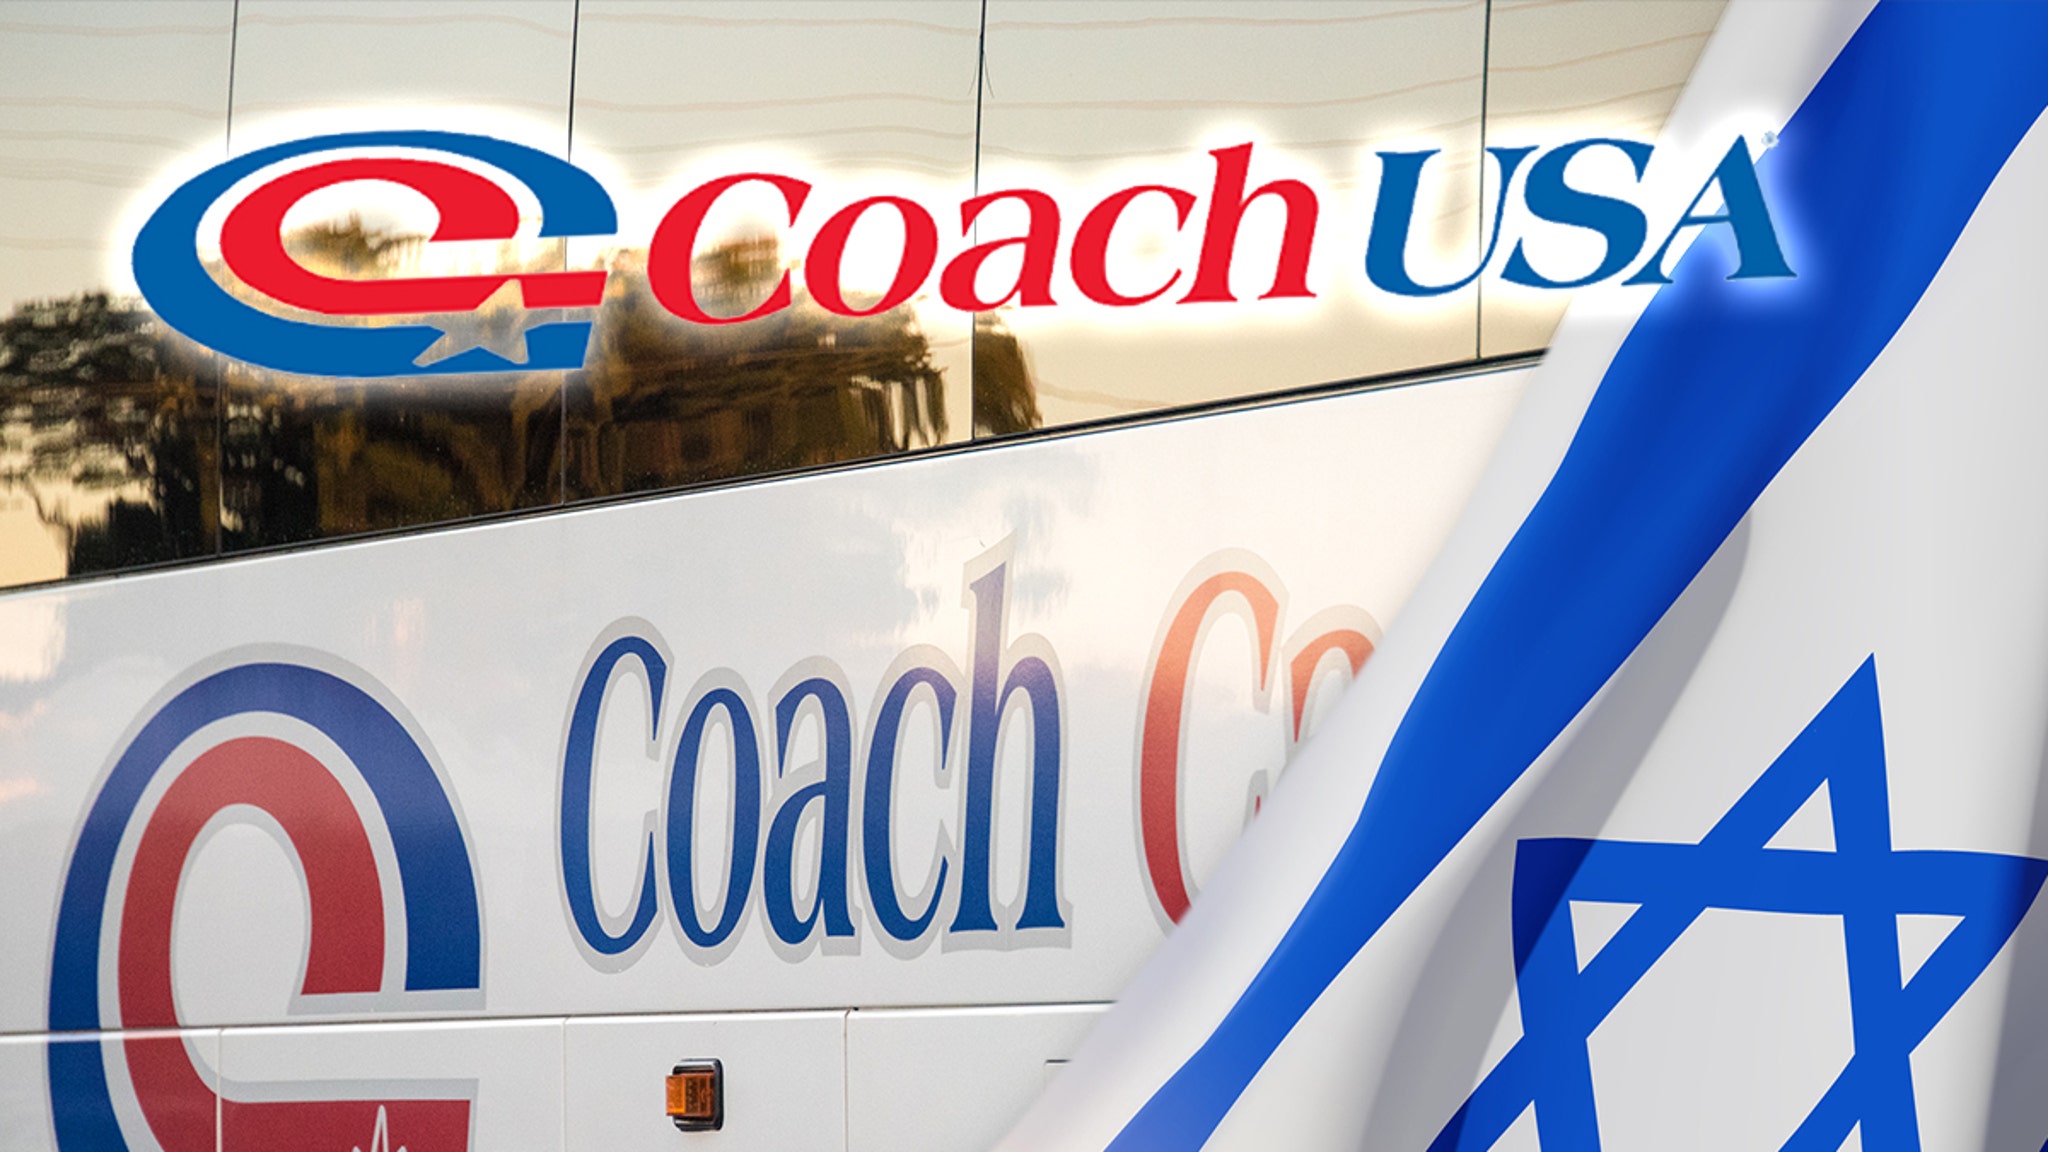 Coach USA Bus Co. Sued for Failing to Transport Jews Ahead of March for Israel